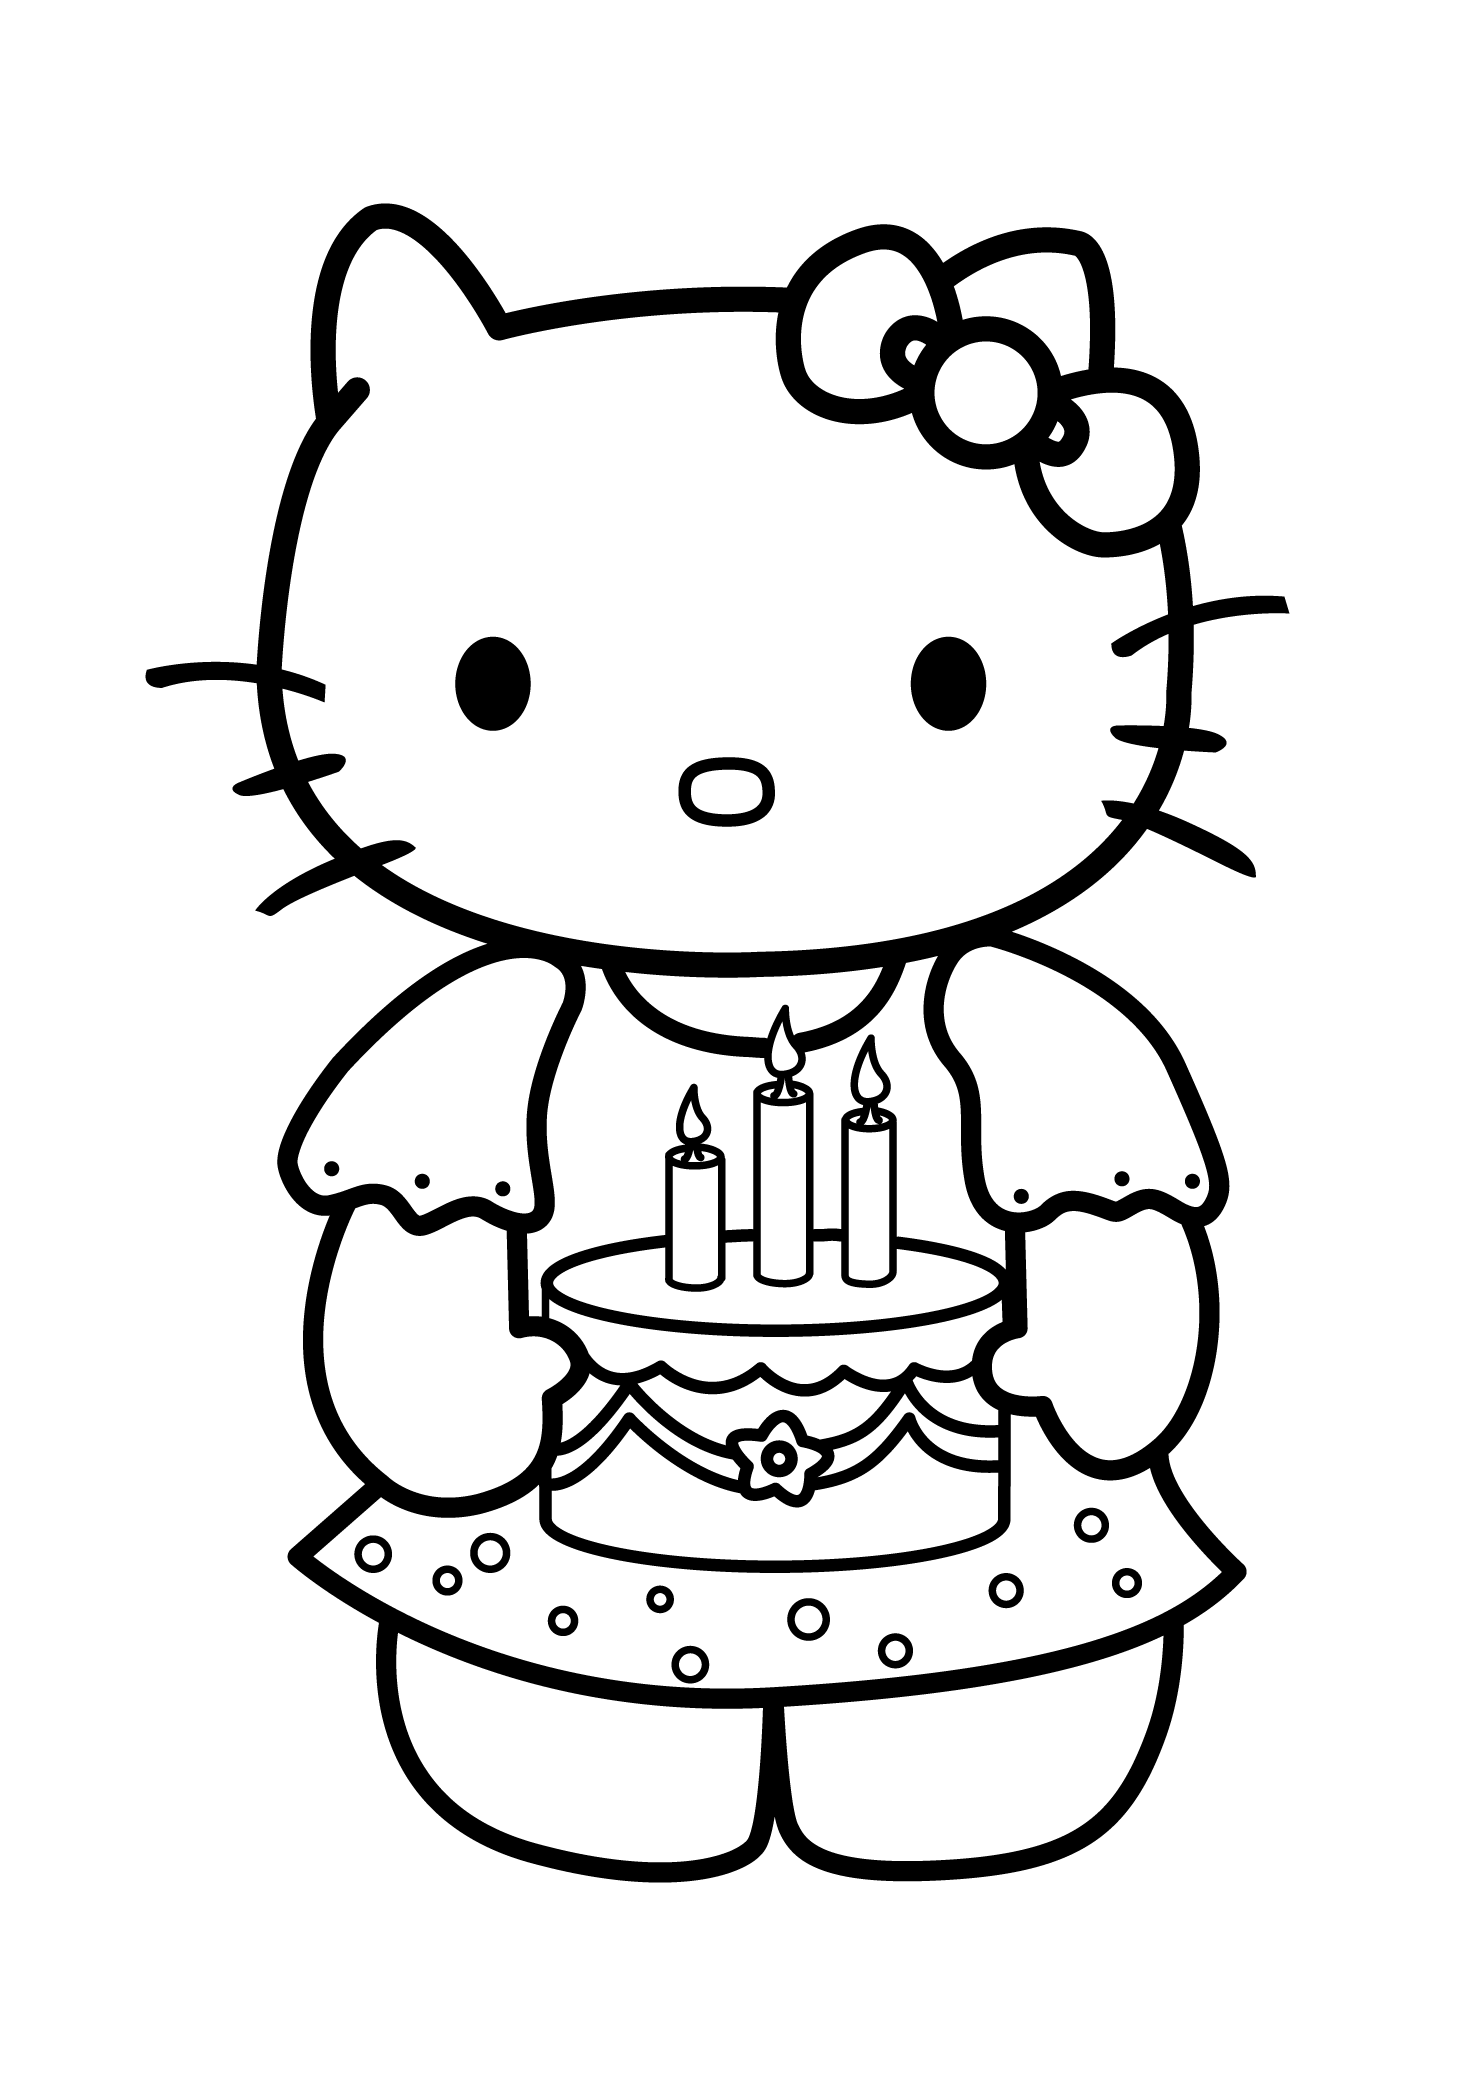 Download Hello Kitty Birthday Coloring Pages - Best Coloring Pages For Kids